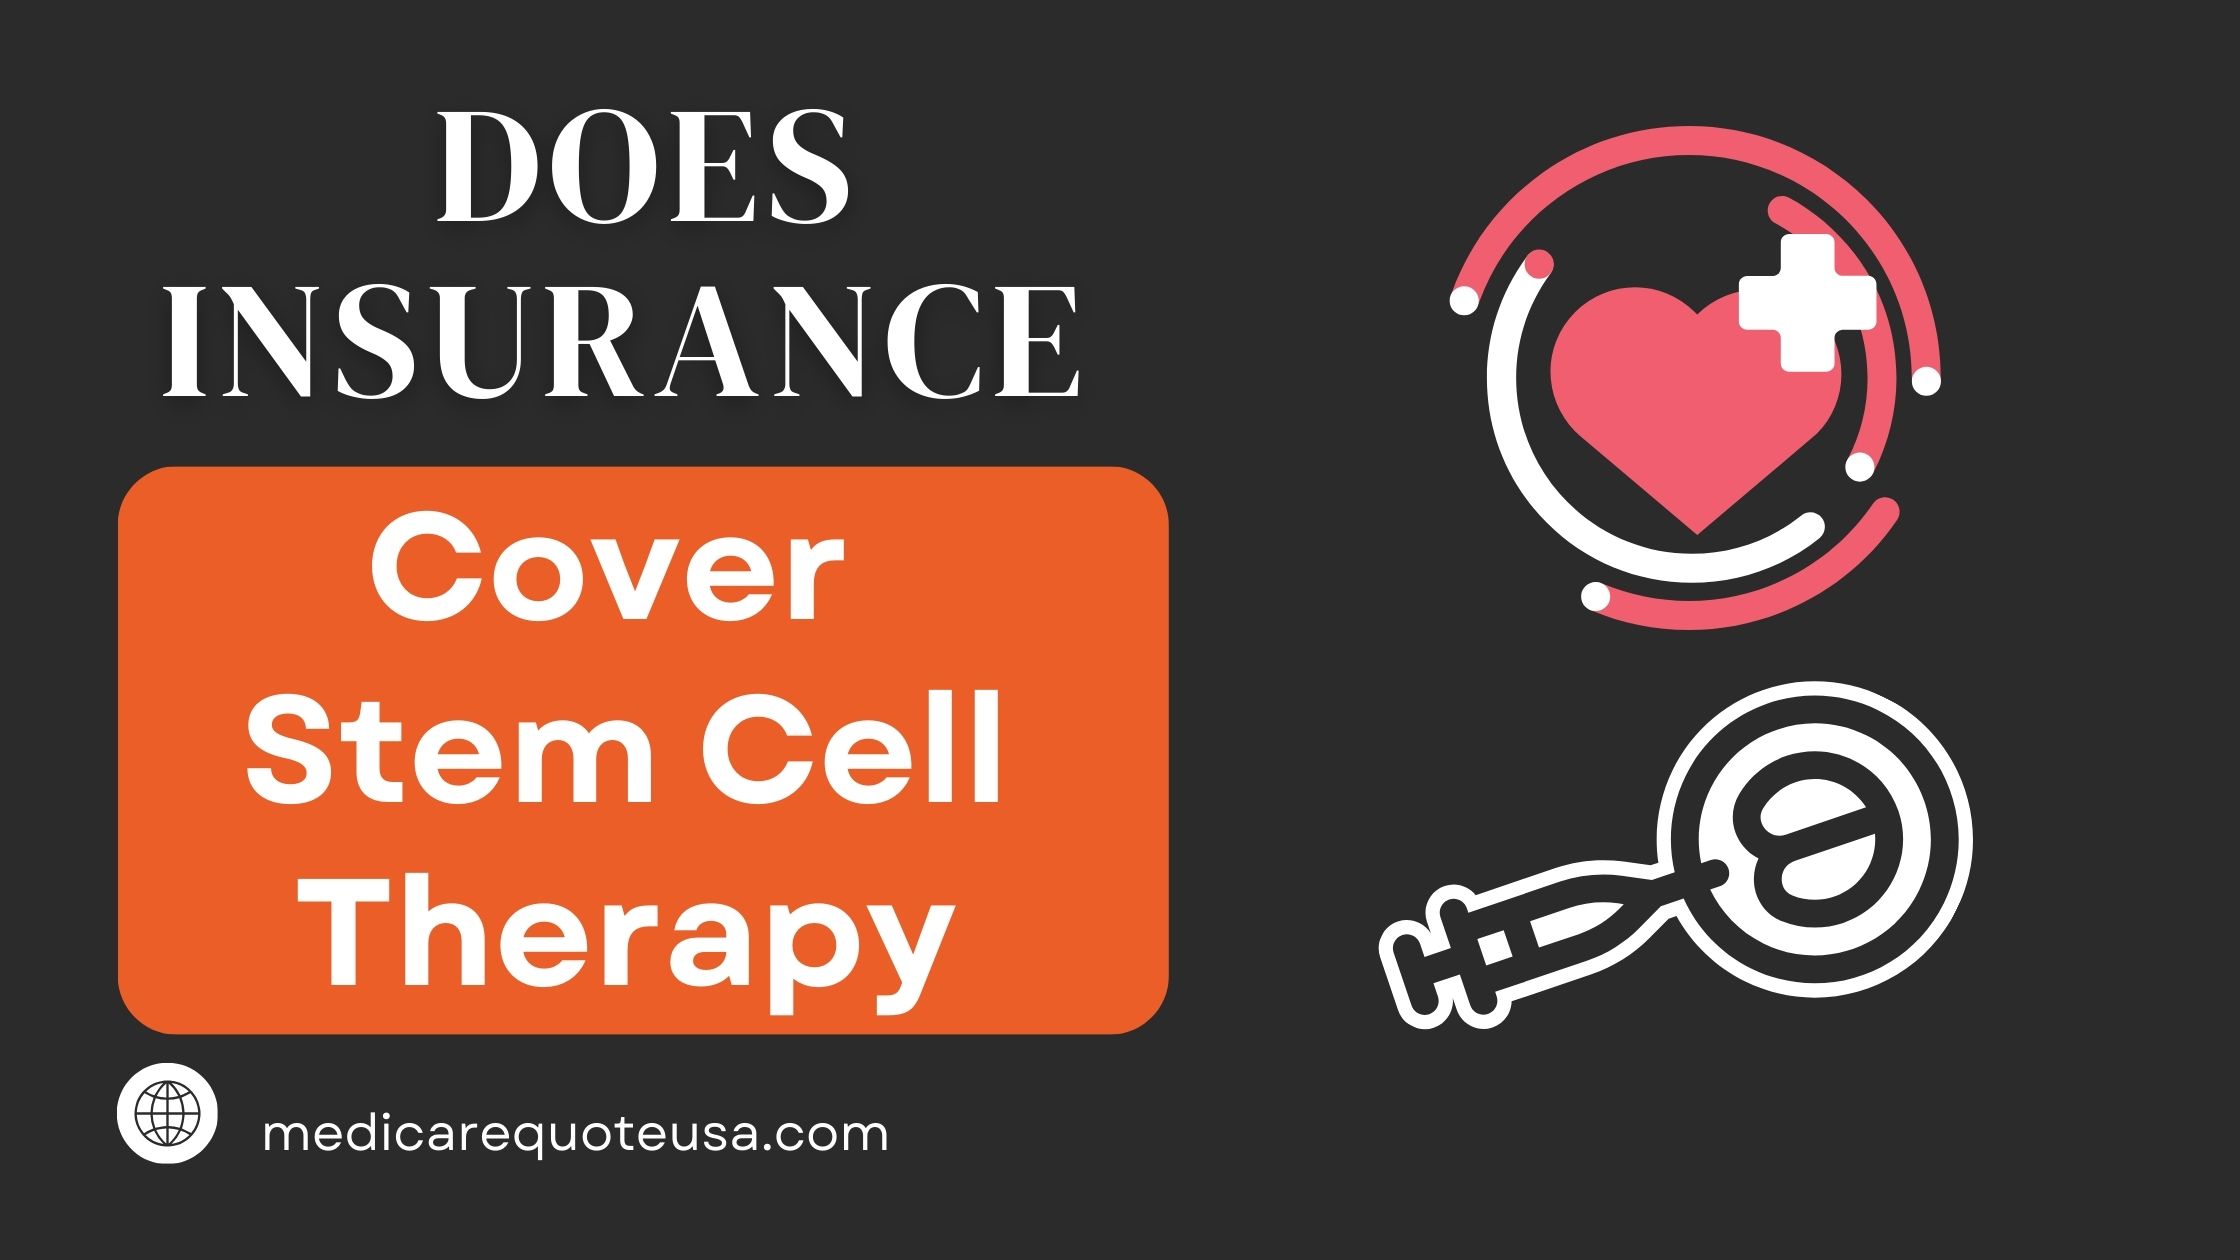 Does Insurance Cover Stem Cell Therapy